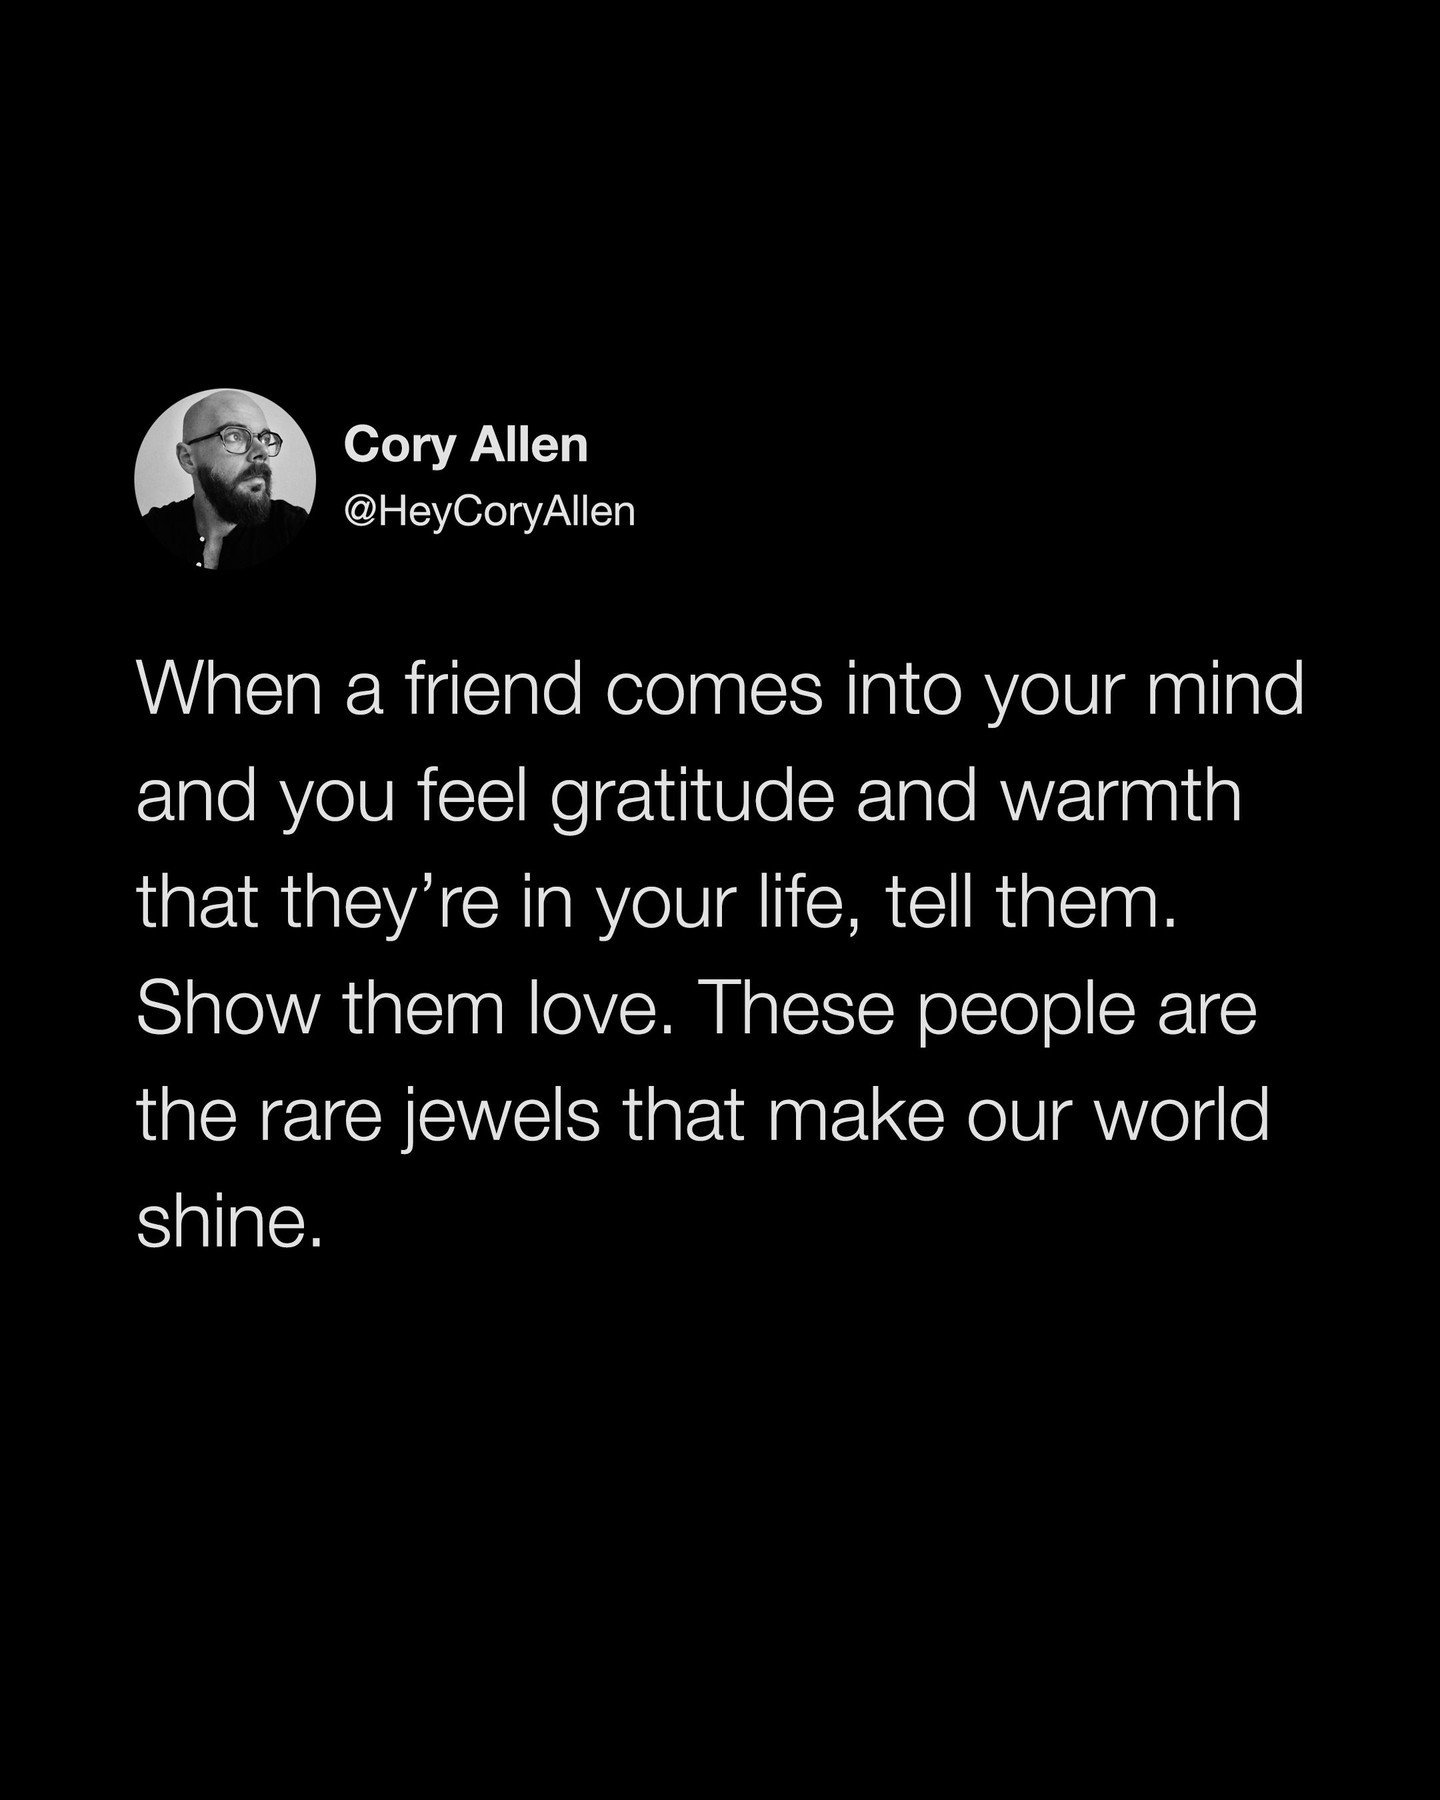 Show your friends some love in the comments 🖤

✍🏻 @heycoryallen: When a friend comes into your thoughts and you start feeling gratitude and warmth that they&rsquo;re in your life, tell them. Show them love. These people are rare jewels that make ou